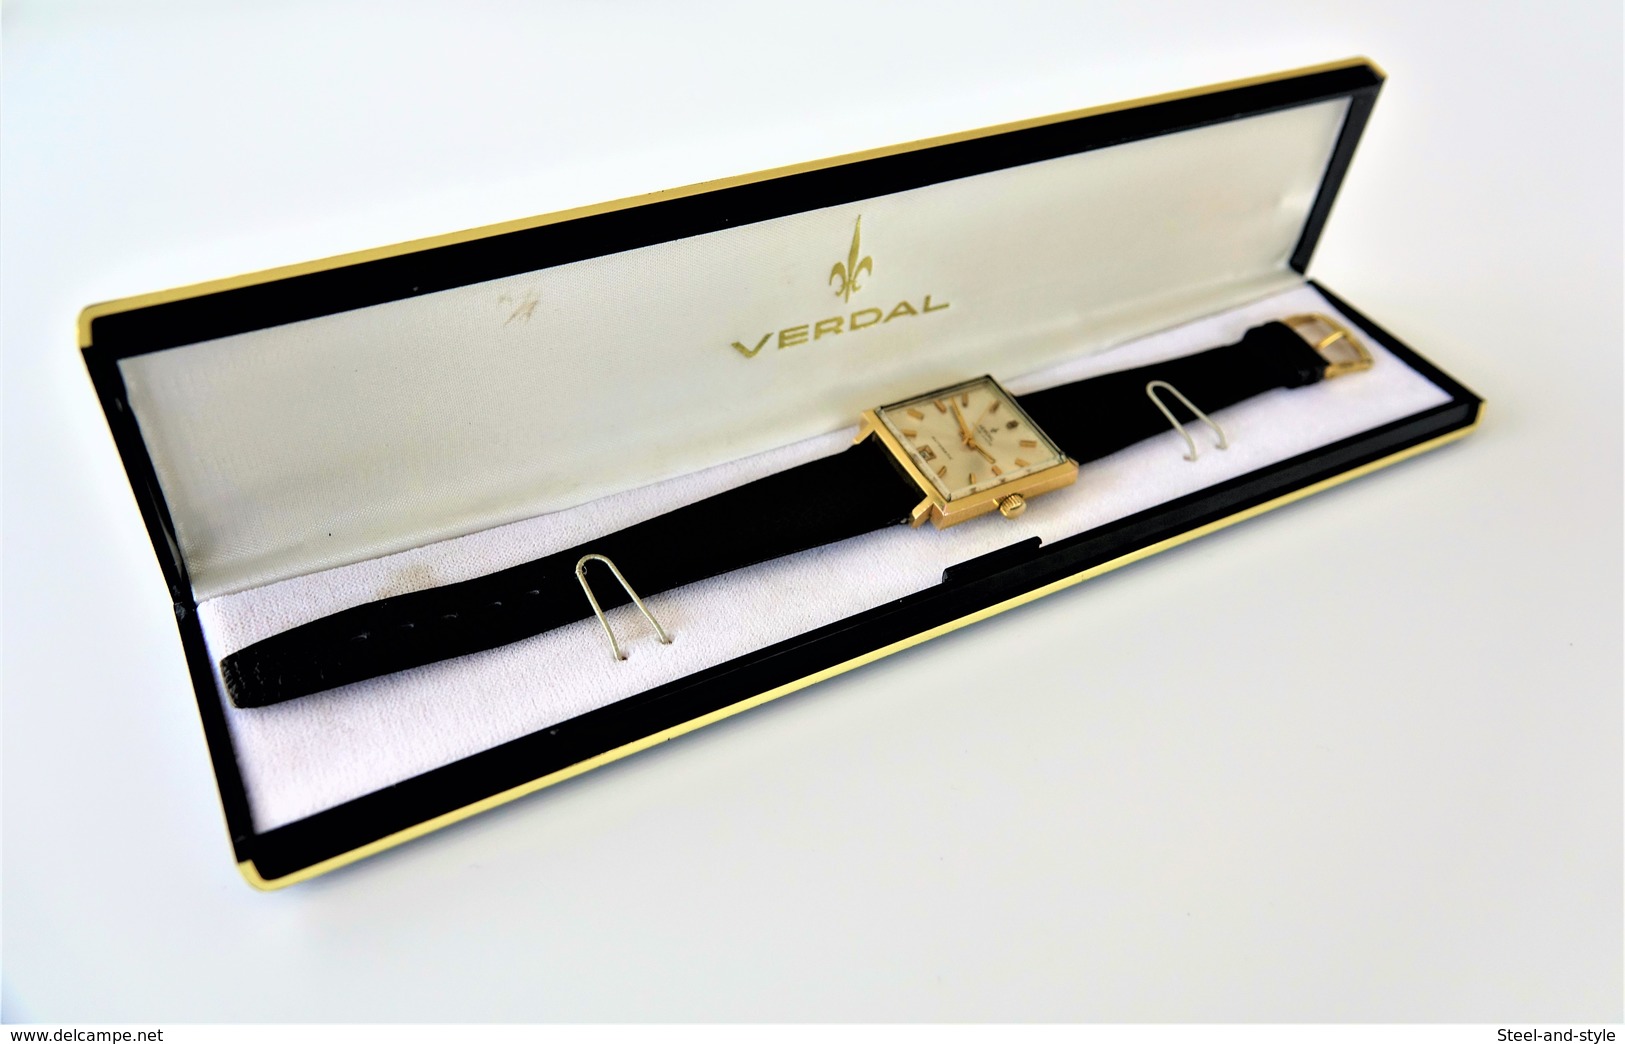 Watches : VERDAL TIME-DATE AUTOMATIC RaRe With Original Box - 20 Microns Gold Plated - Original - Running - 1970s - Watches: Top-of-the-Line